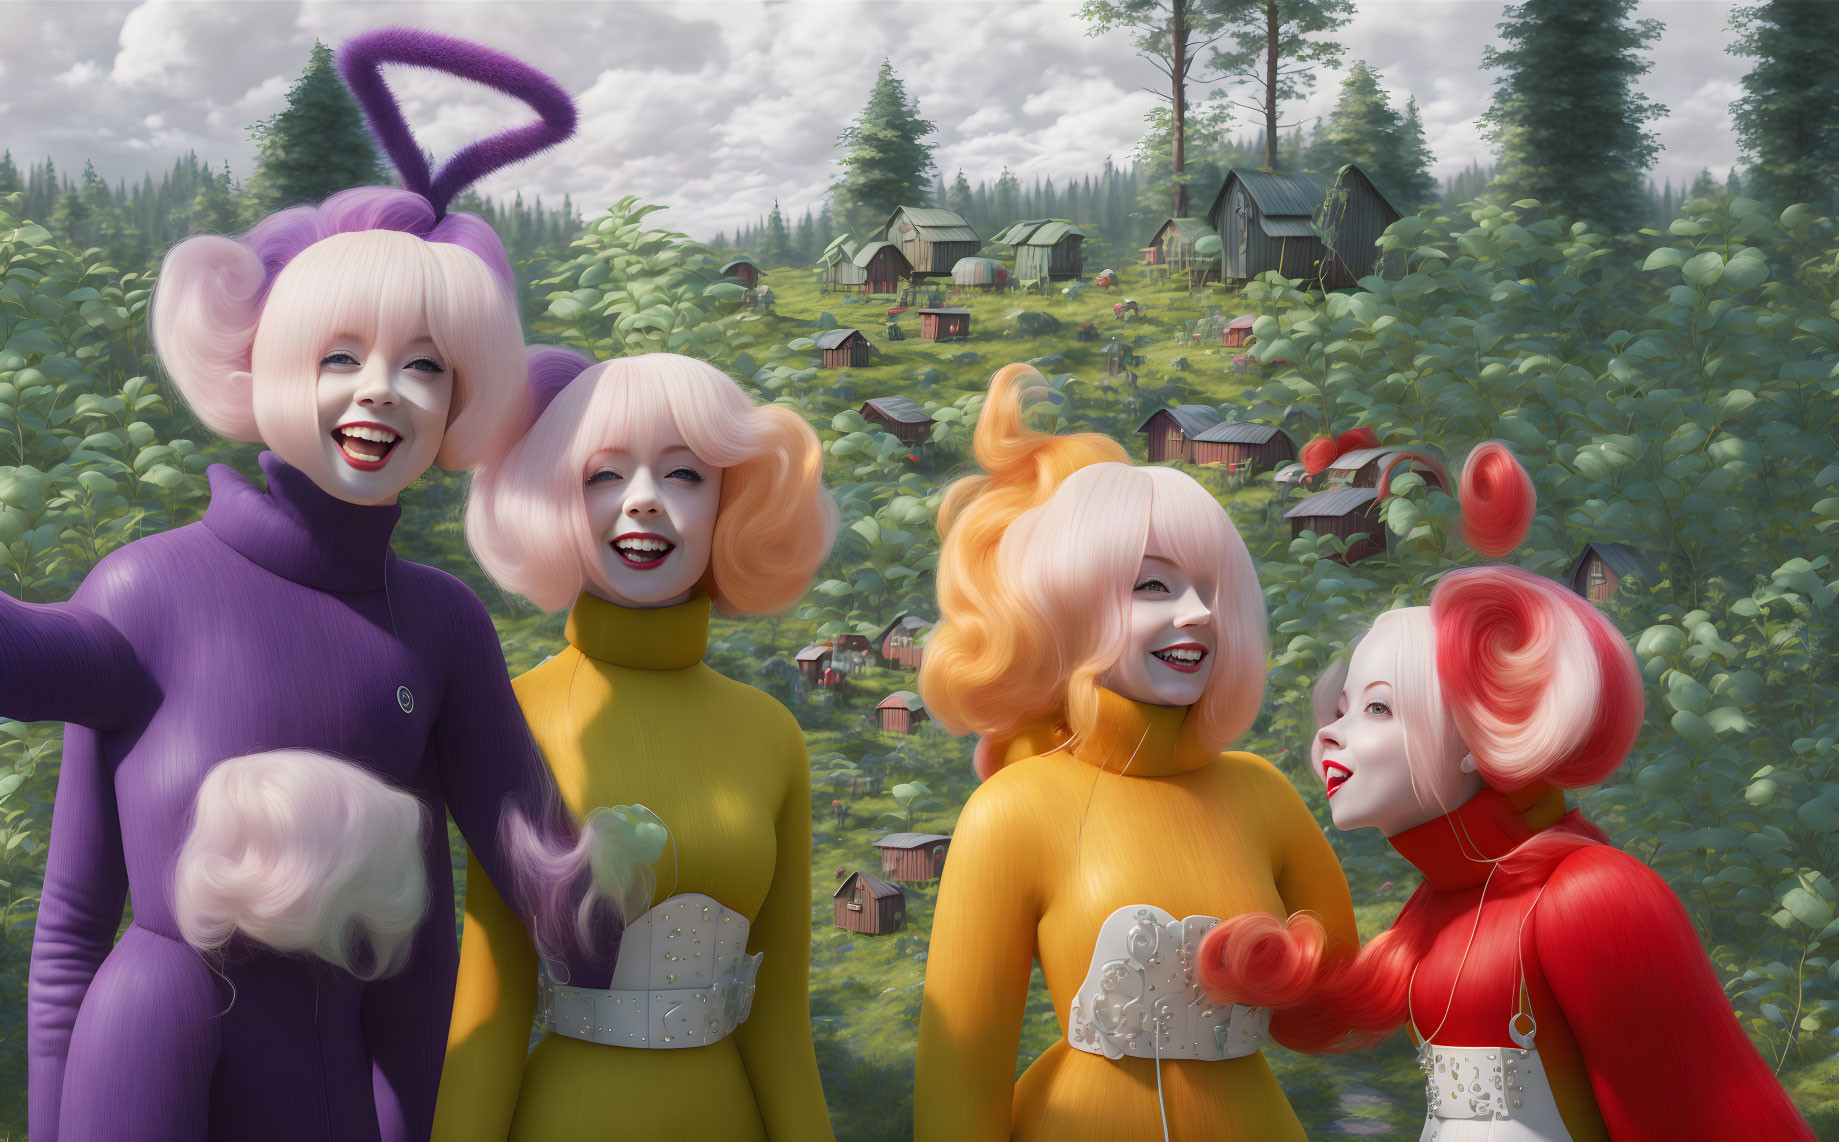 Four stylized women in colorful outfits laughing in whimsical outdoor scene